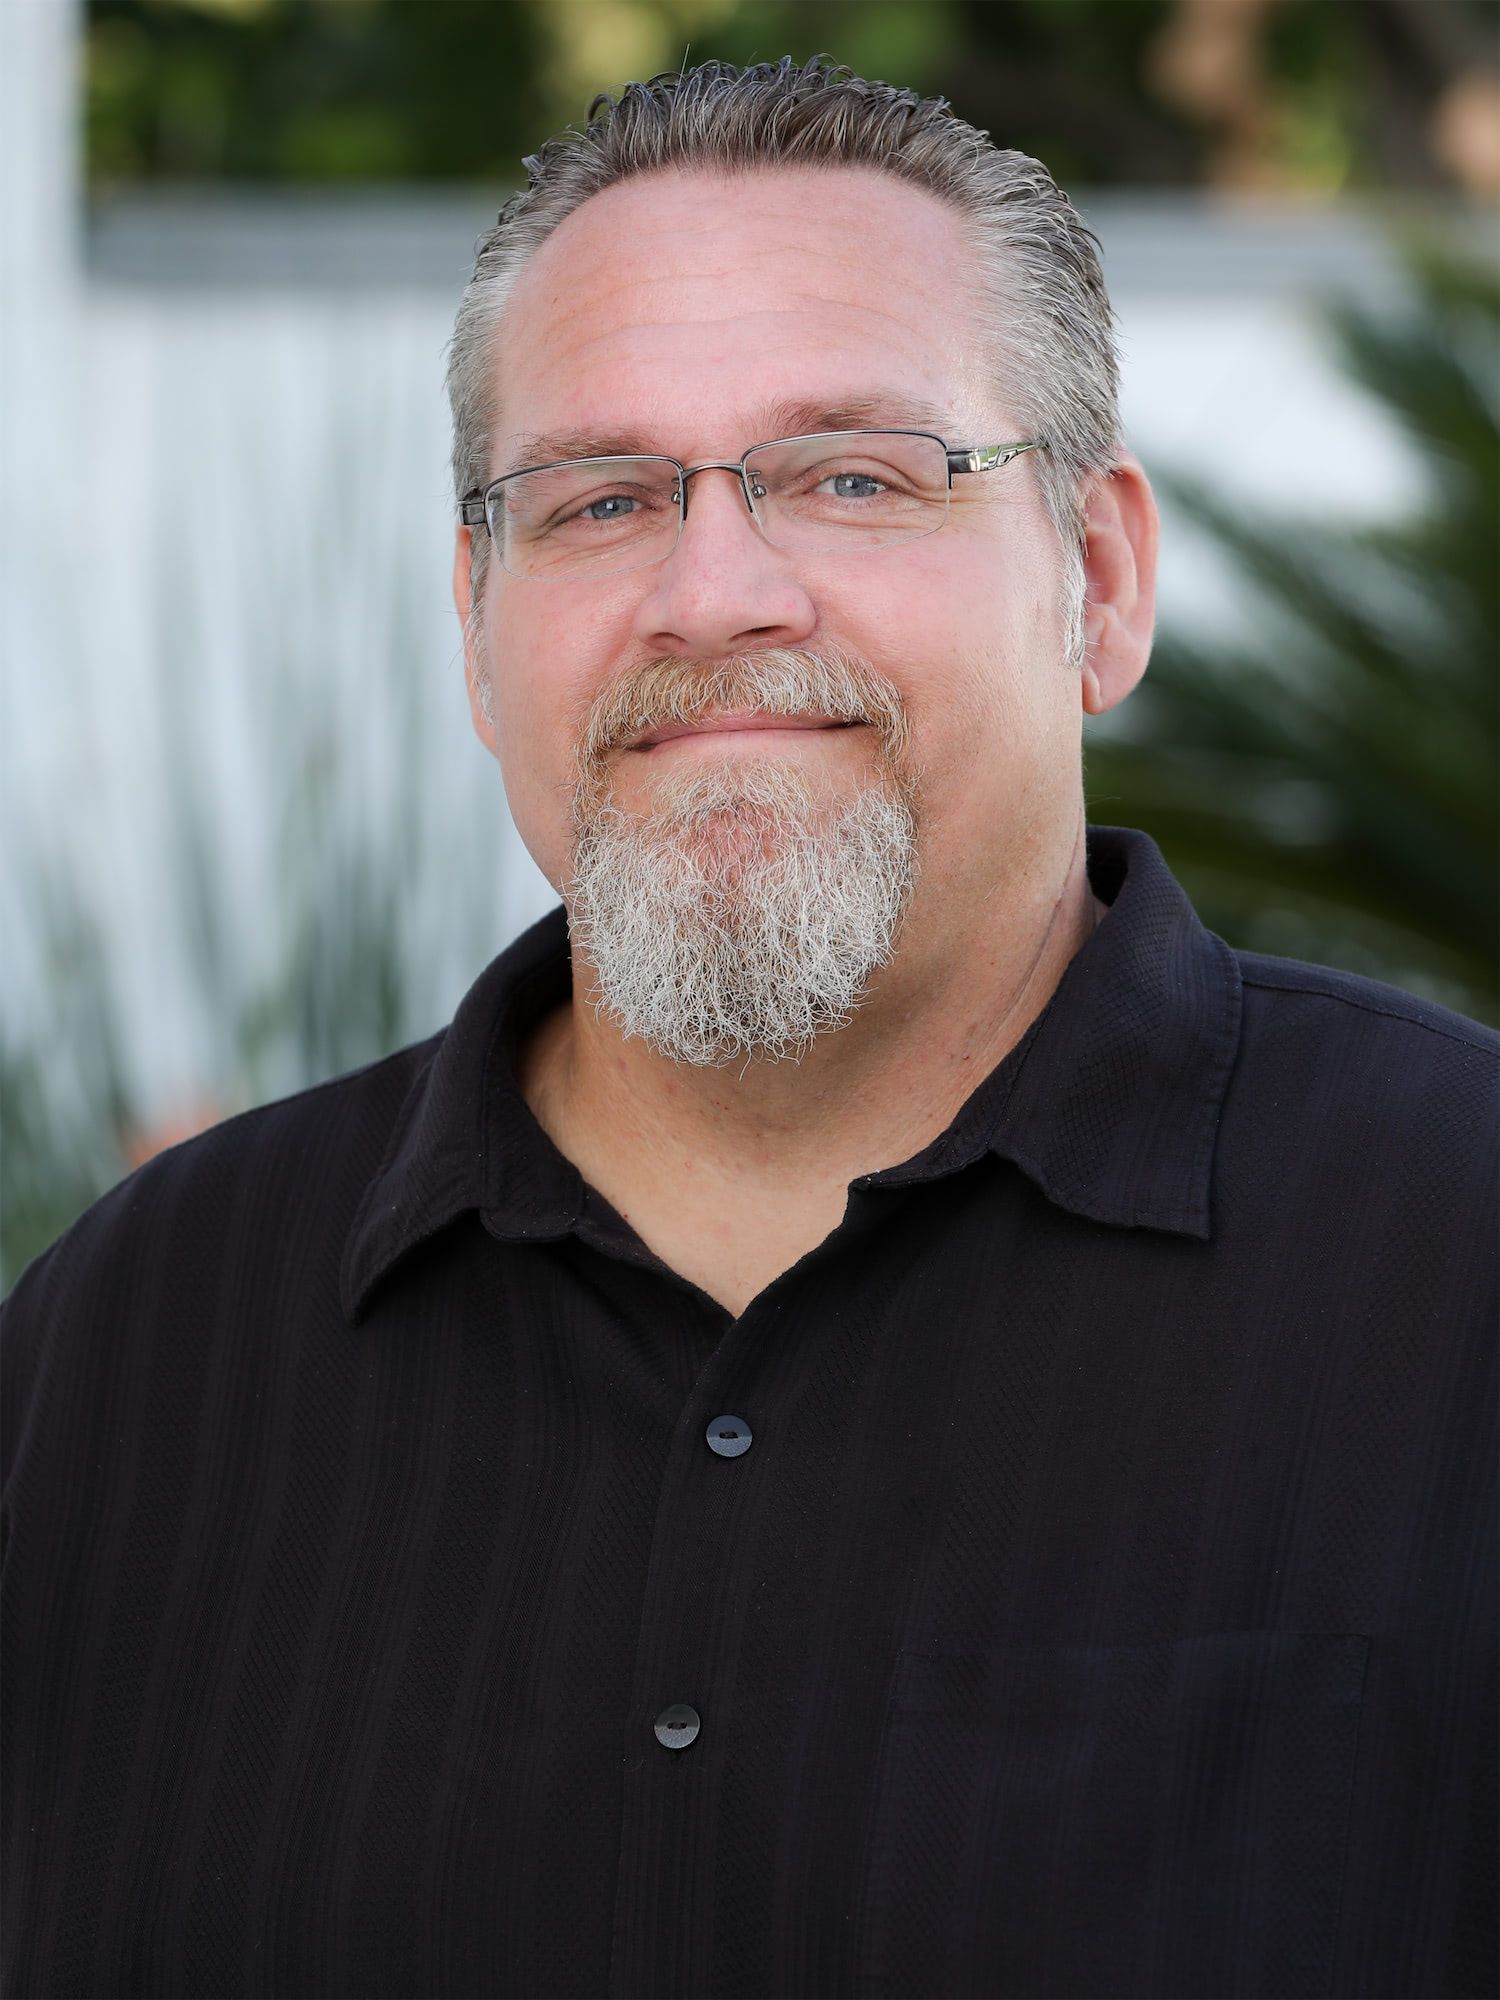 a man with glasses and a beard is wearing a black shirt